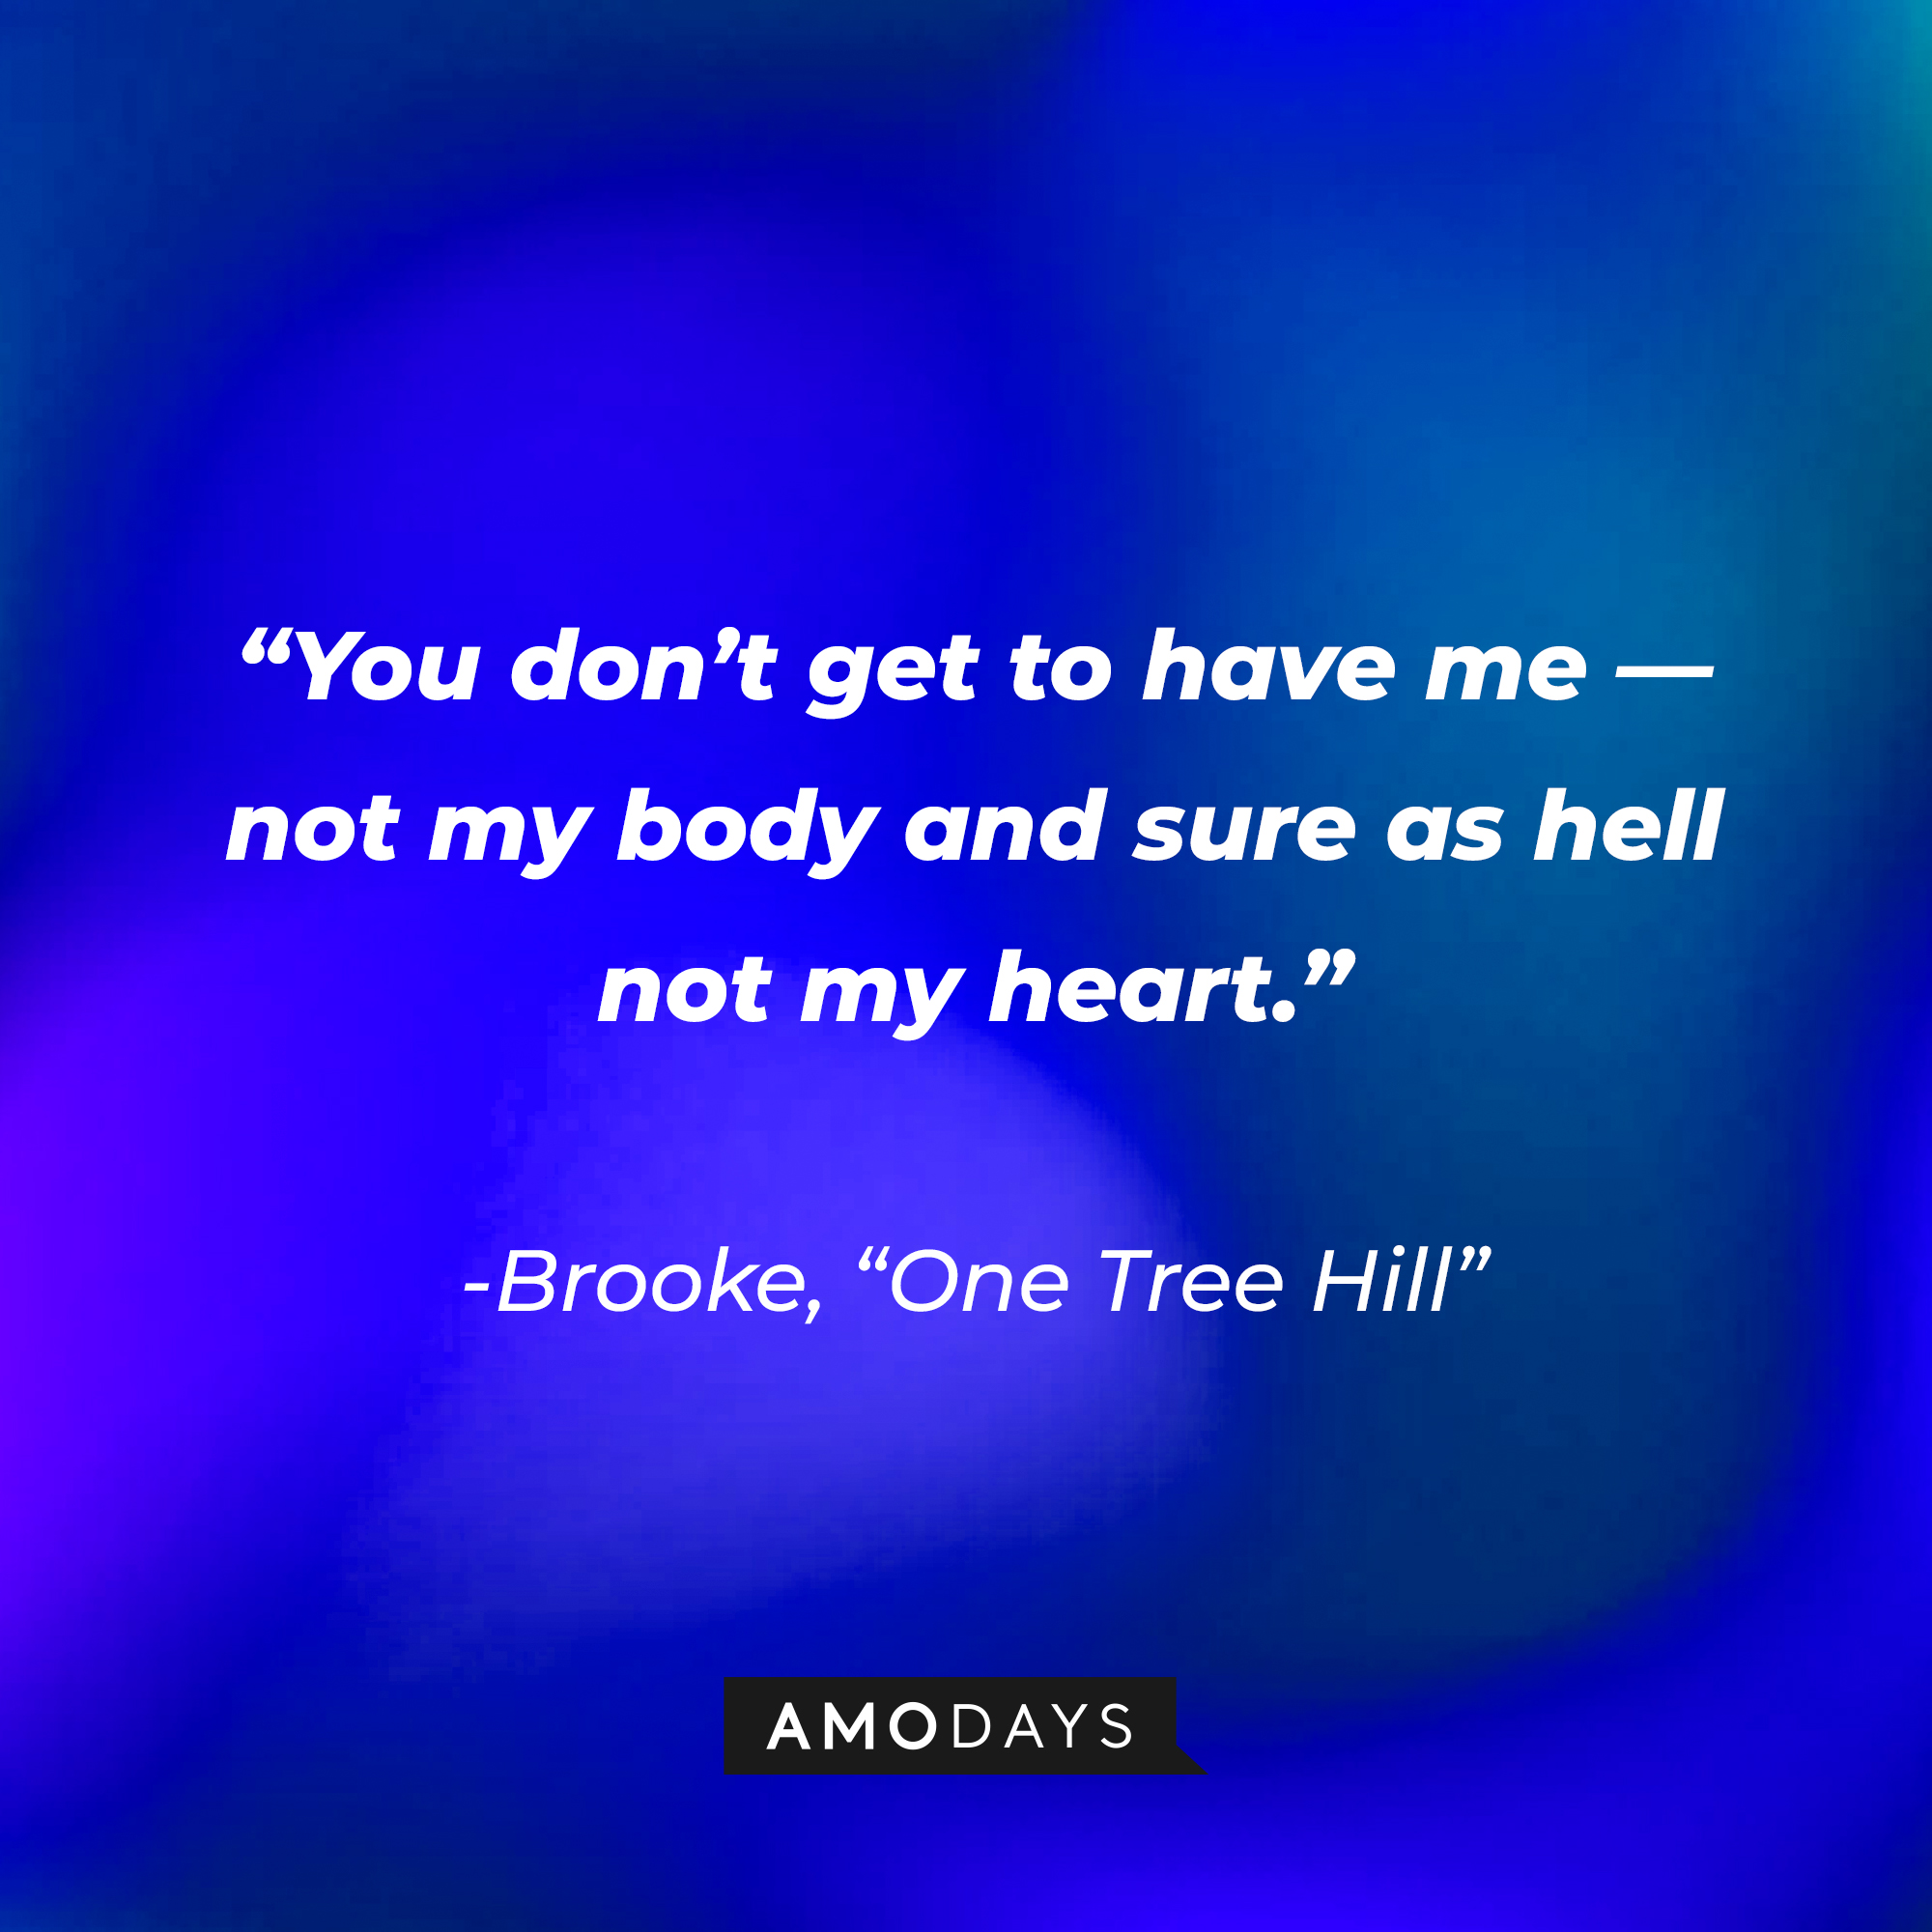 Brooke’s quote from “One Tree Hill”: “You don’t get to have me — not my body and sure as hell not my heart.” | Source: AmoDays